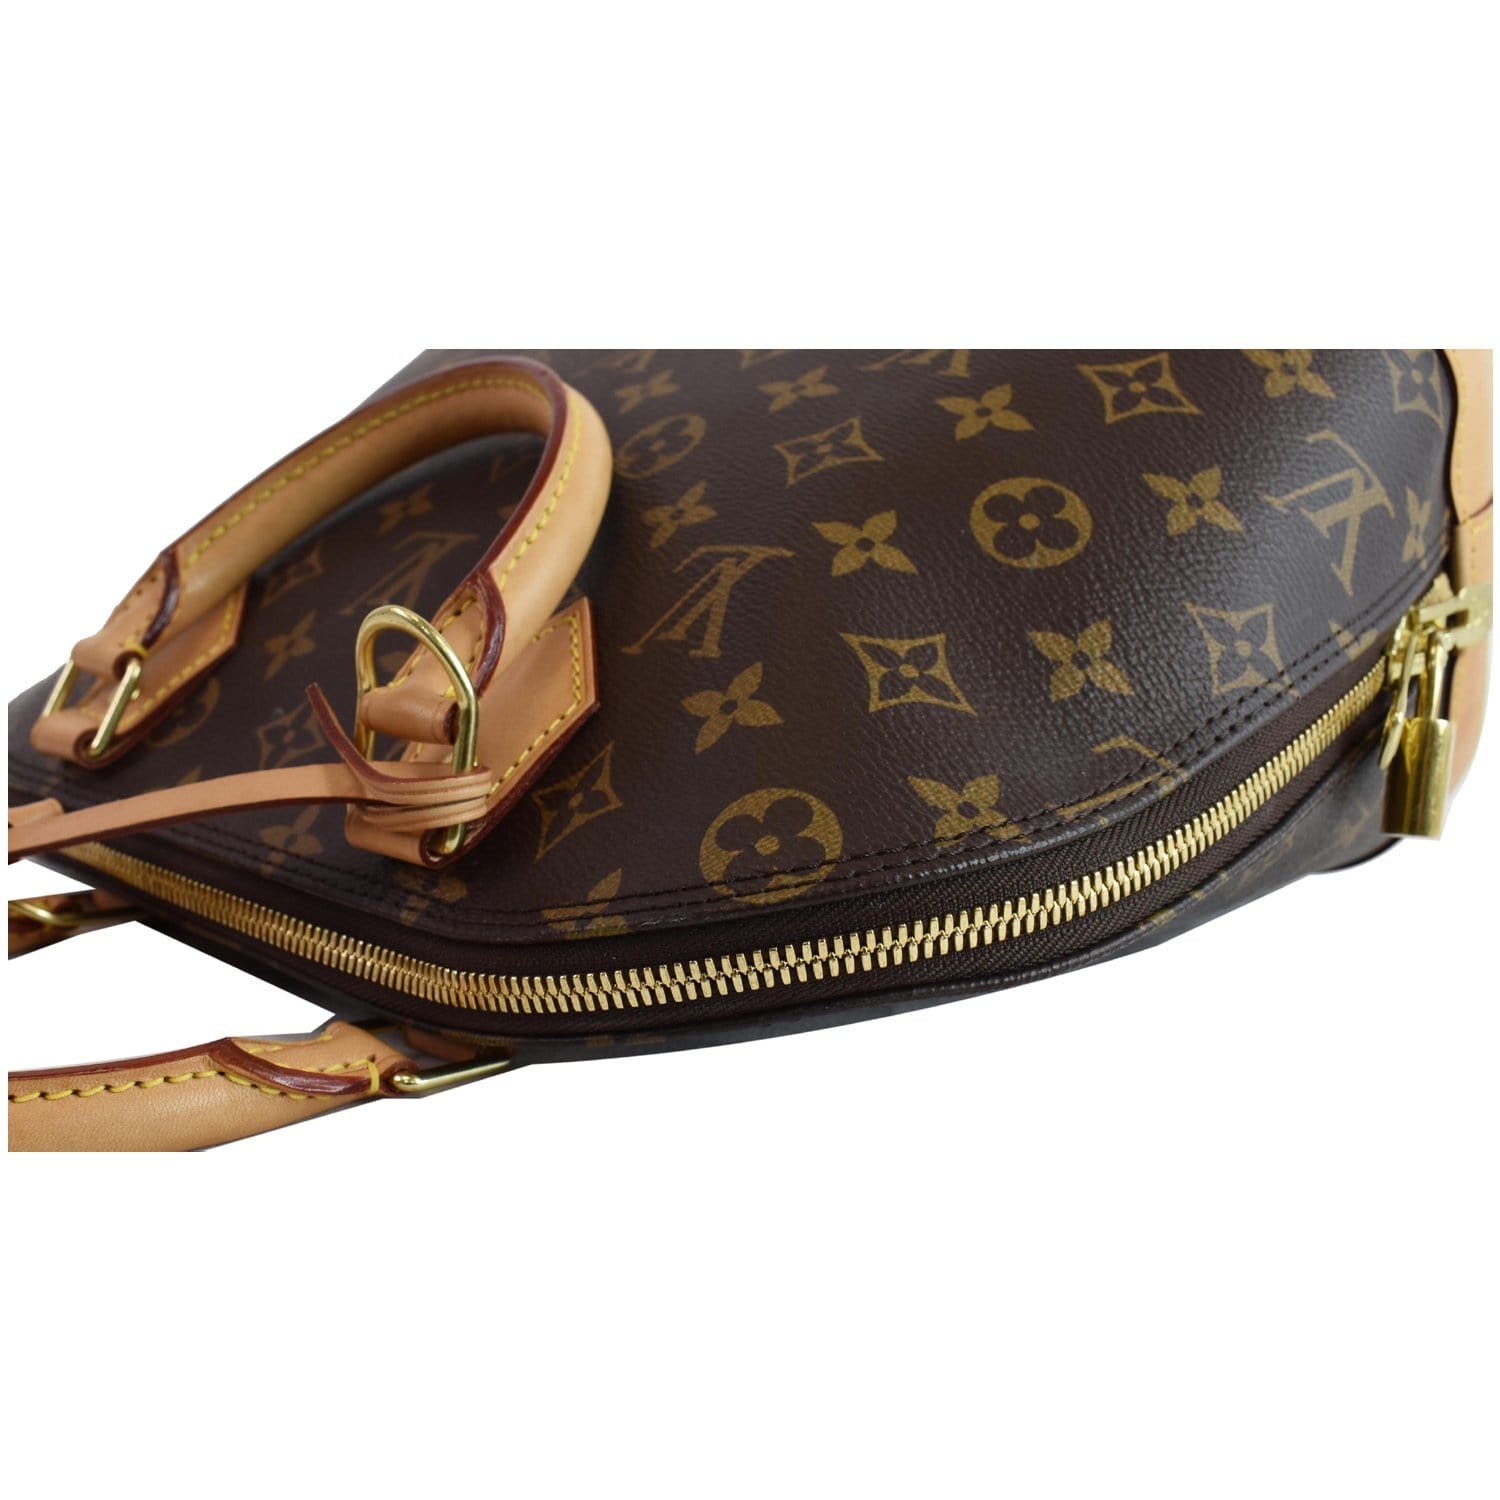 Louis Vuitton Canvas and Leahter Pm Alma Bag Monogram with Gold